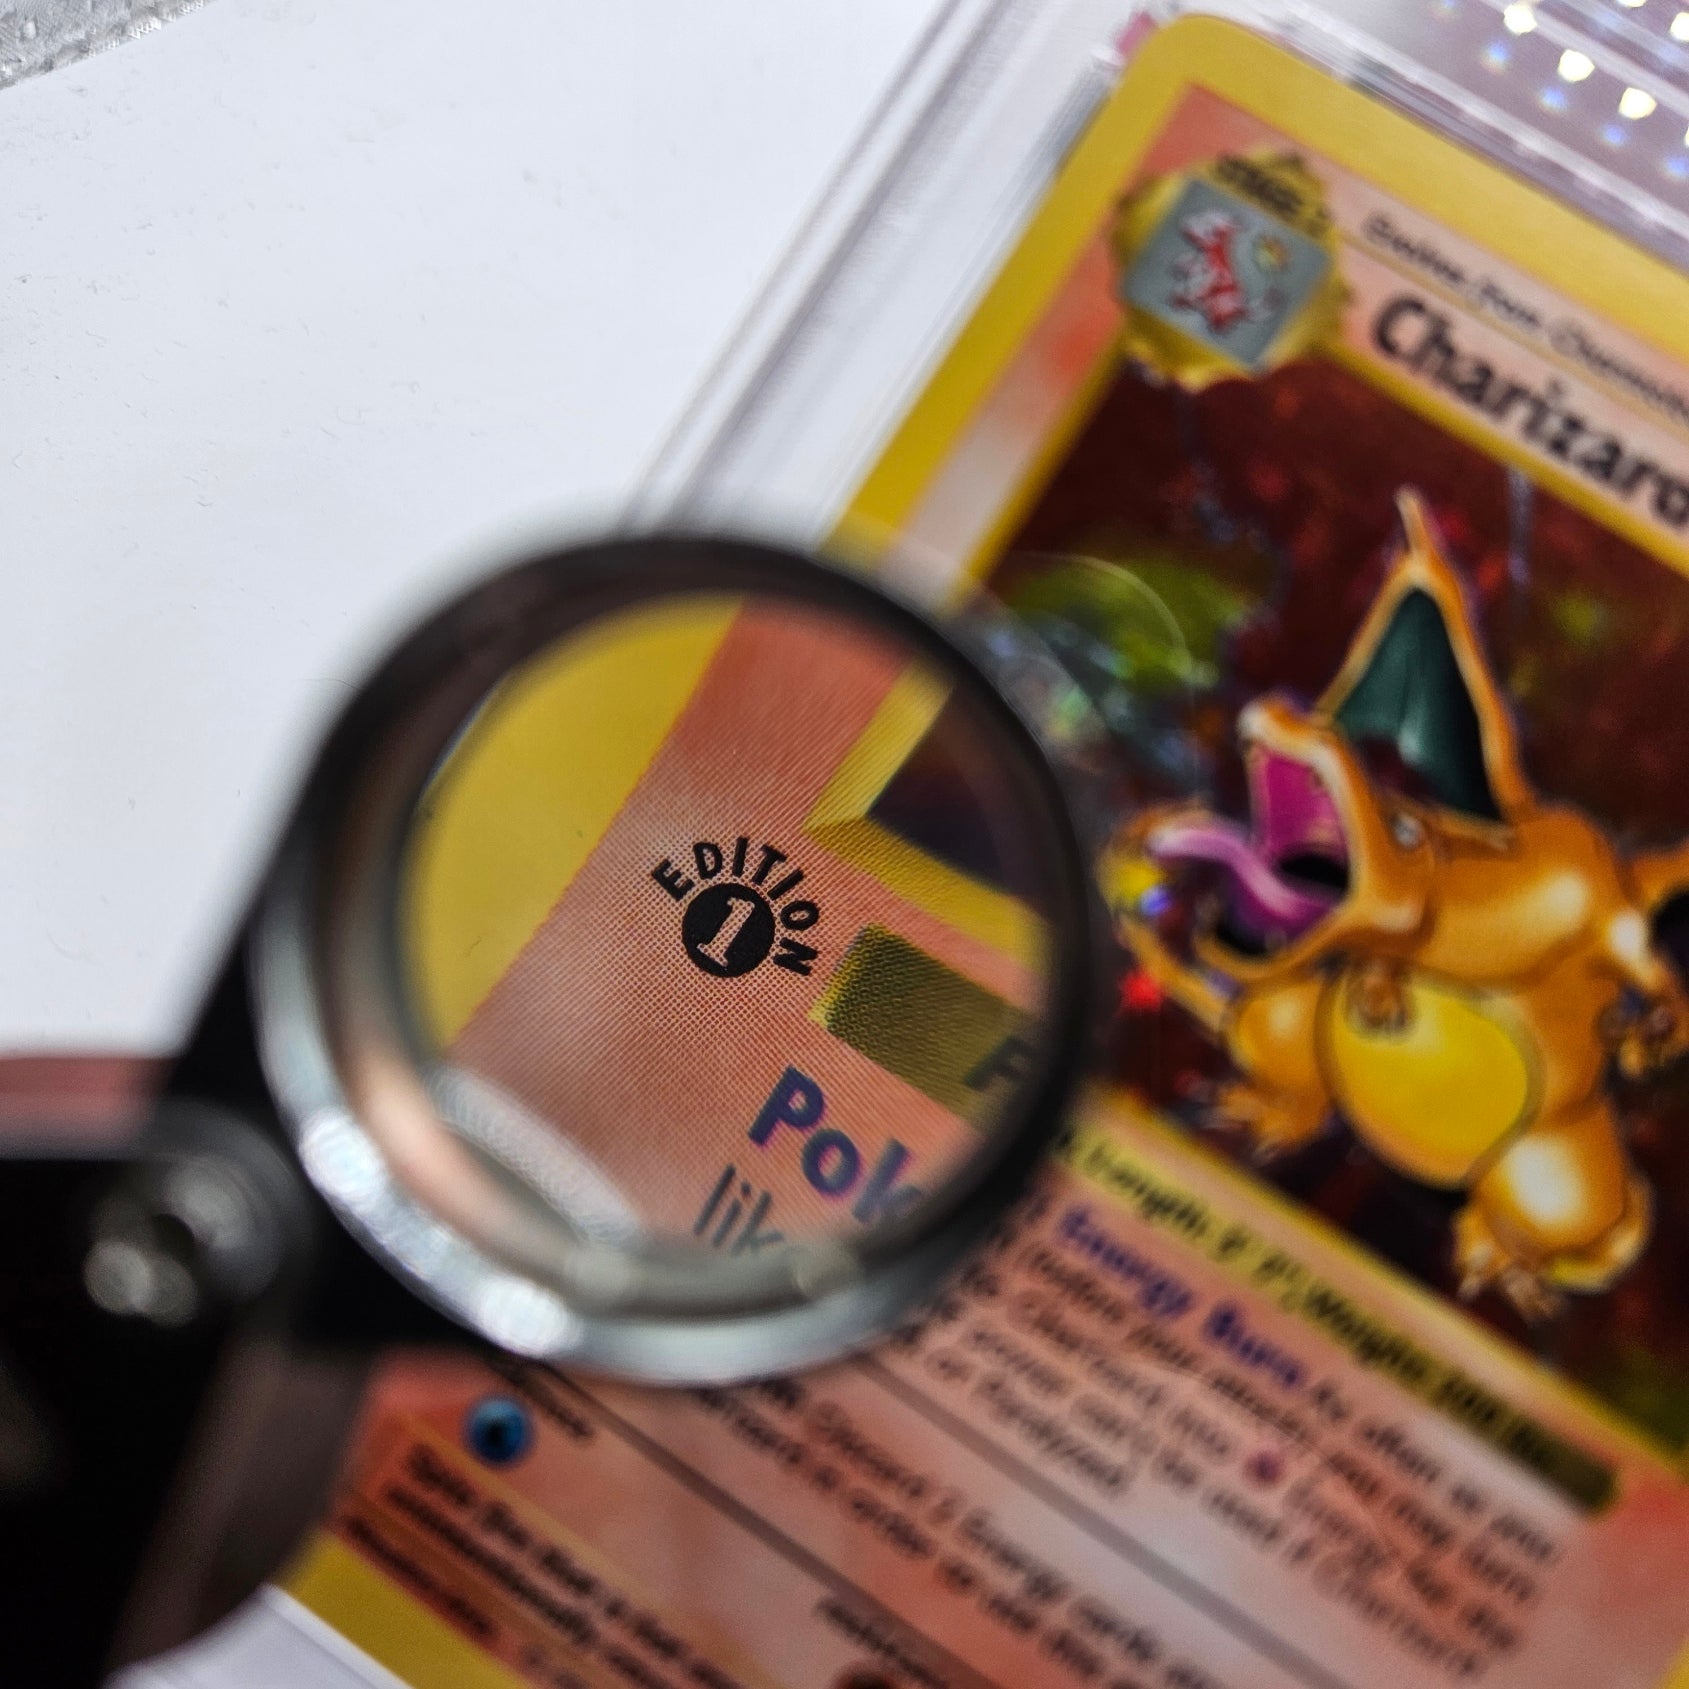 Jewler's Loupe for trading cards - Magnifying glass for Pokémon cards